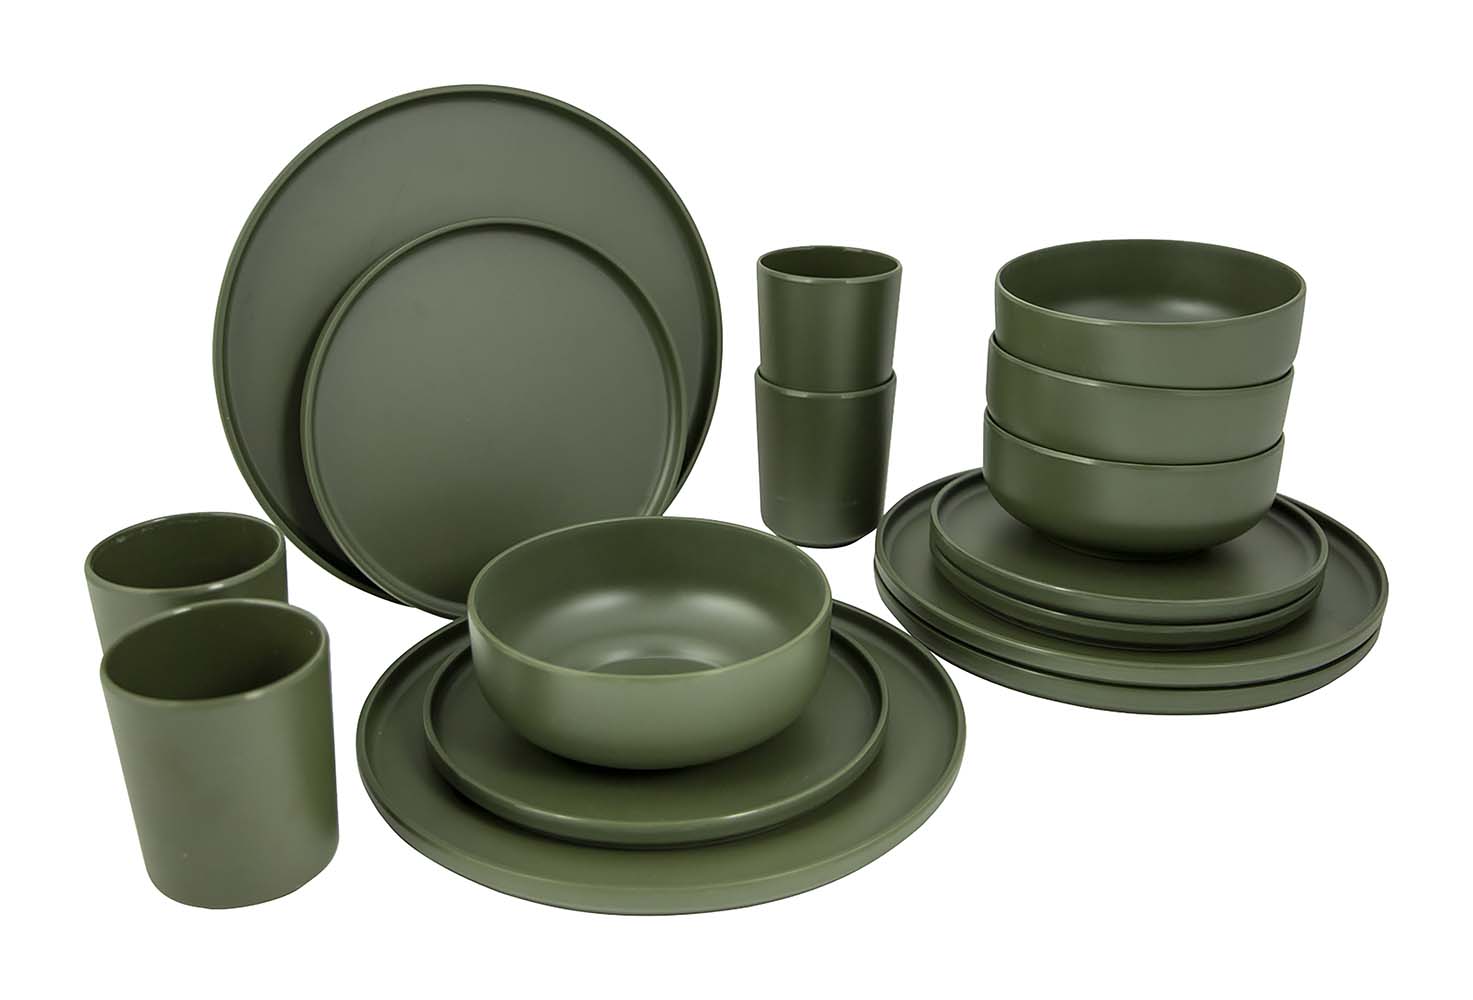 6181452 Bo-Camp - Industrial collection - Tableware - Patom - Melamine - 16 Pieces - Green